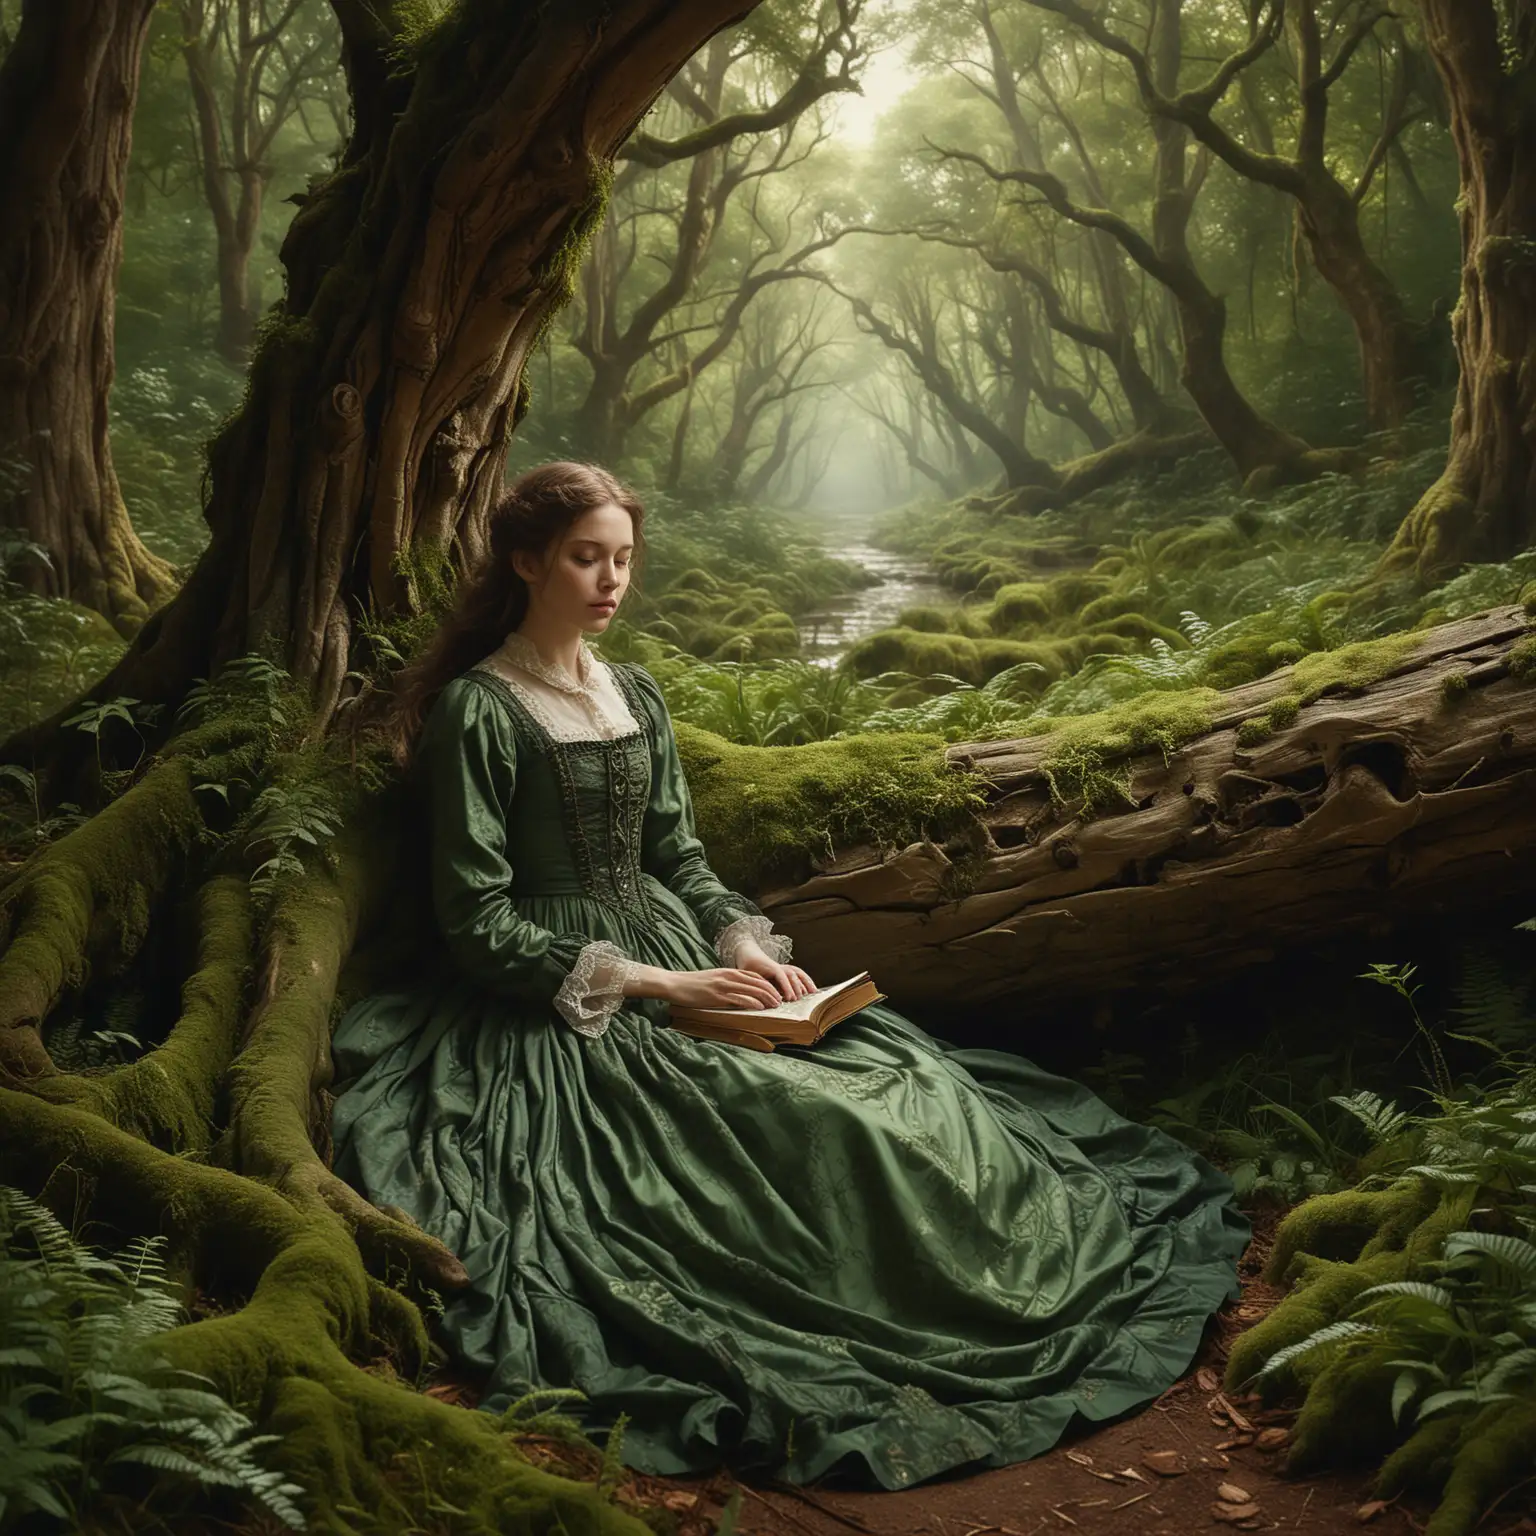 Imagine a beautiful, magical realistic photo of a scene in a mysterious but peaceful forest where the rich, green vegetation typical of the Victorian era creates a natural backdrop. At the centre of the painting sits a young, beautiful woman, dressed in a Victorian gown, resting on a moss covered with an old oak trunk. The open historic book on her lap symbolizes escaping into a world of dreams and fantasies where magic is a state of mind. Her presence blends harmoniously into her surroundings, creating an impression of unity with nature. The background, full of trees and forest vegetation, strengthens the atmosphere of peace and seclusion. This photo, full of peace and contemplation, emphasizes the elusive magic of moments of sunk in thoughts that inspire and transfer to another dimension, reflecting the magic of dreams and the depth of unattainable desires, while being in keeping with the spirit of the Victorian era.